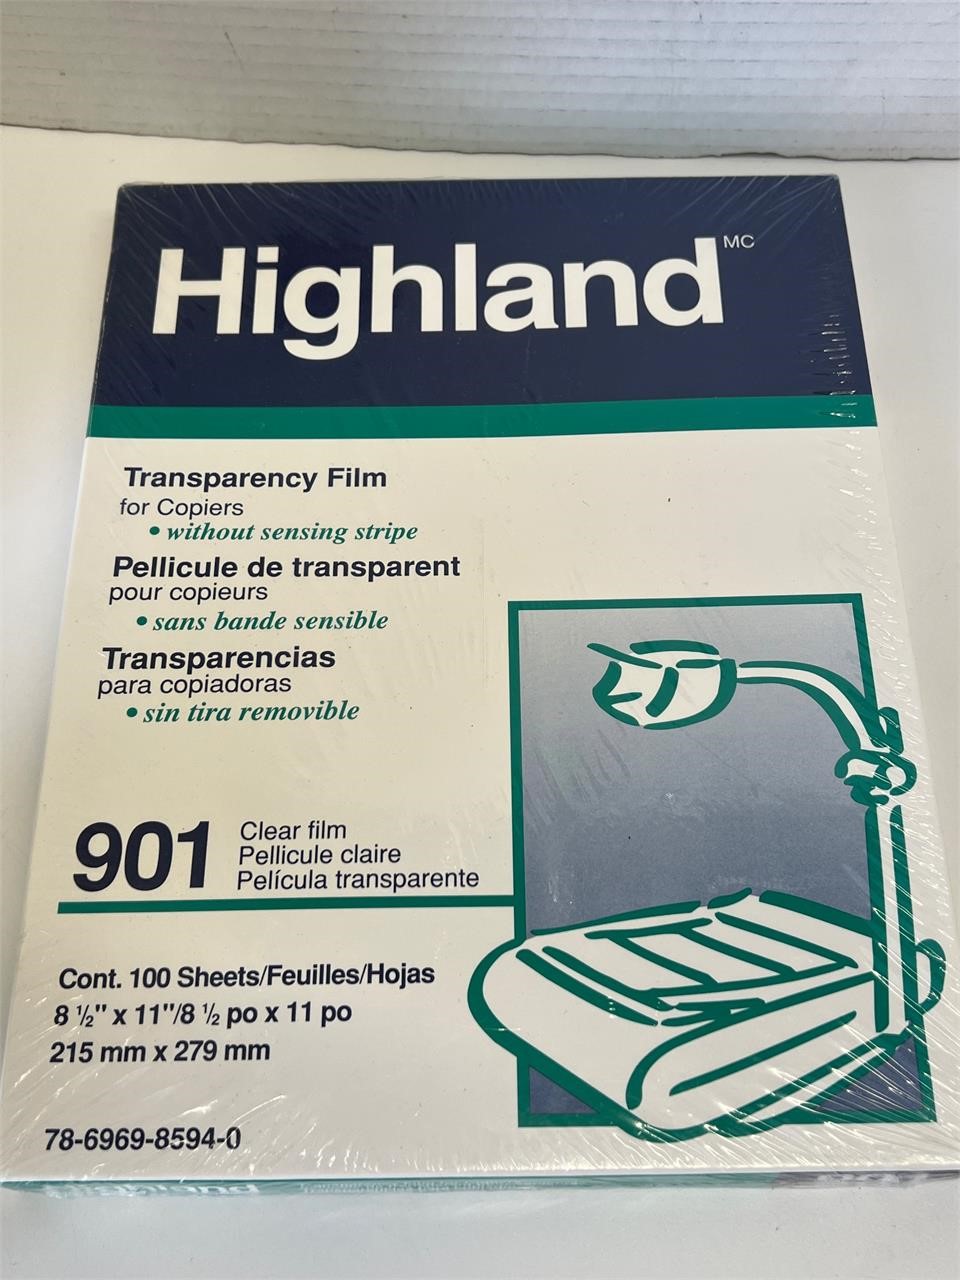 New Unopened Highland Transparency Film